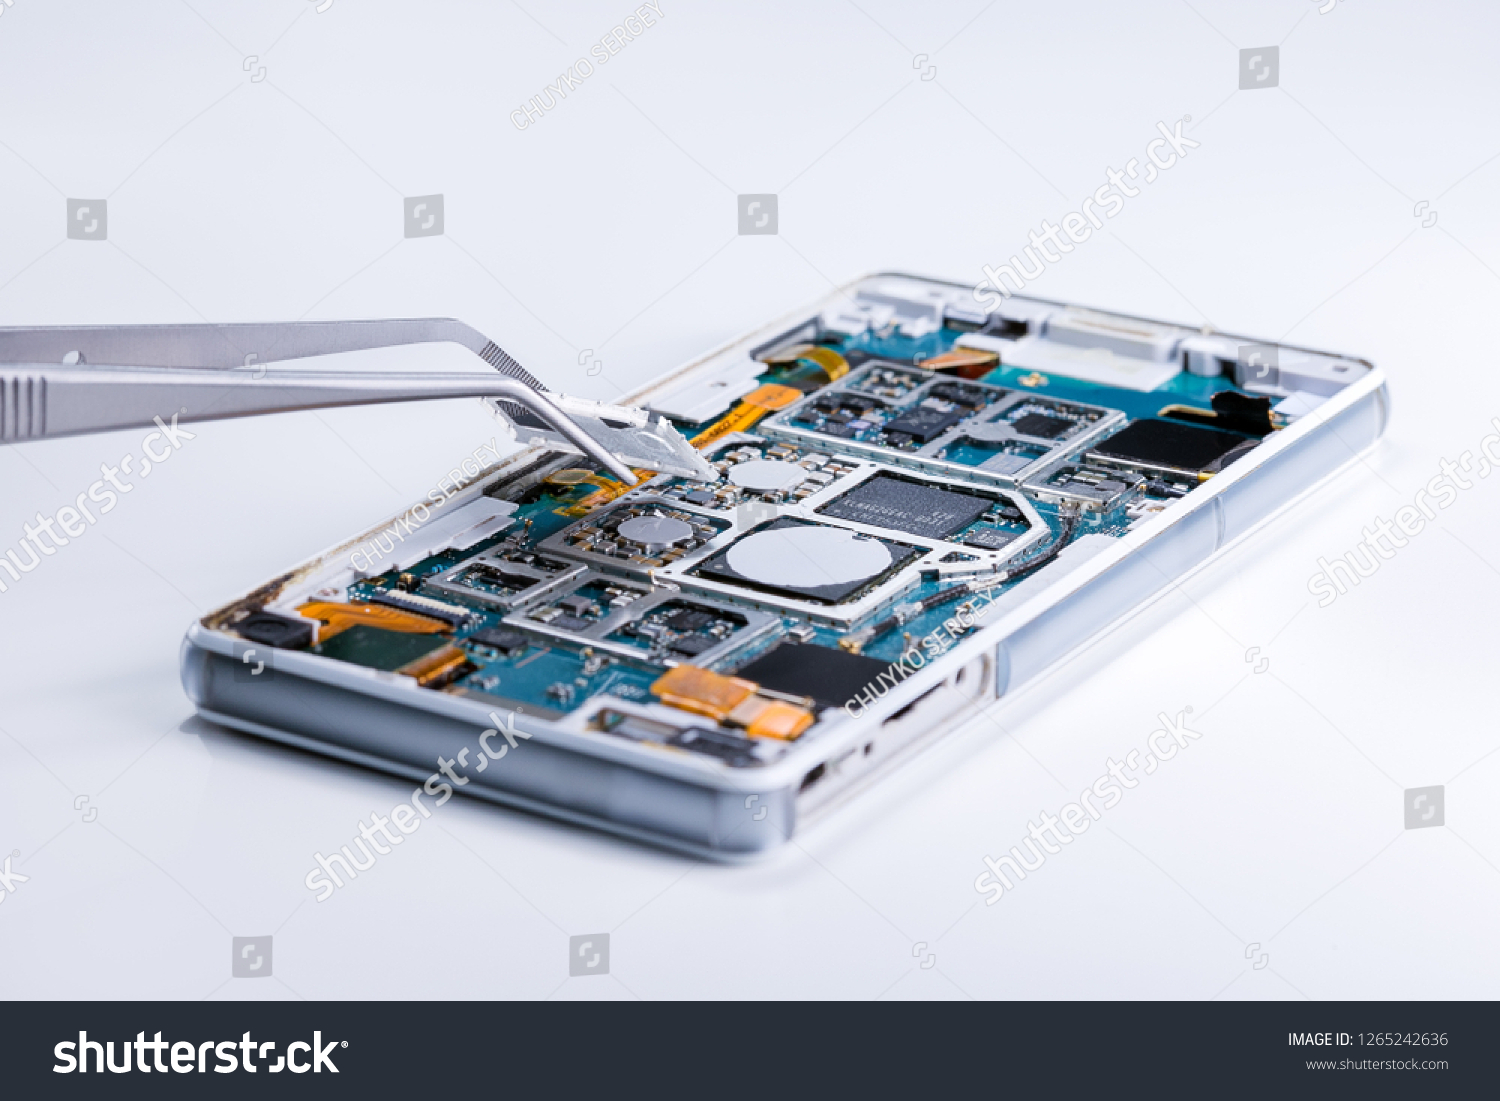 Repairing the smartphone's motherboard in the lab. the concept of computer hardware, mobile phone, electronic, repairing, upgrade and technology. #1265242636